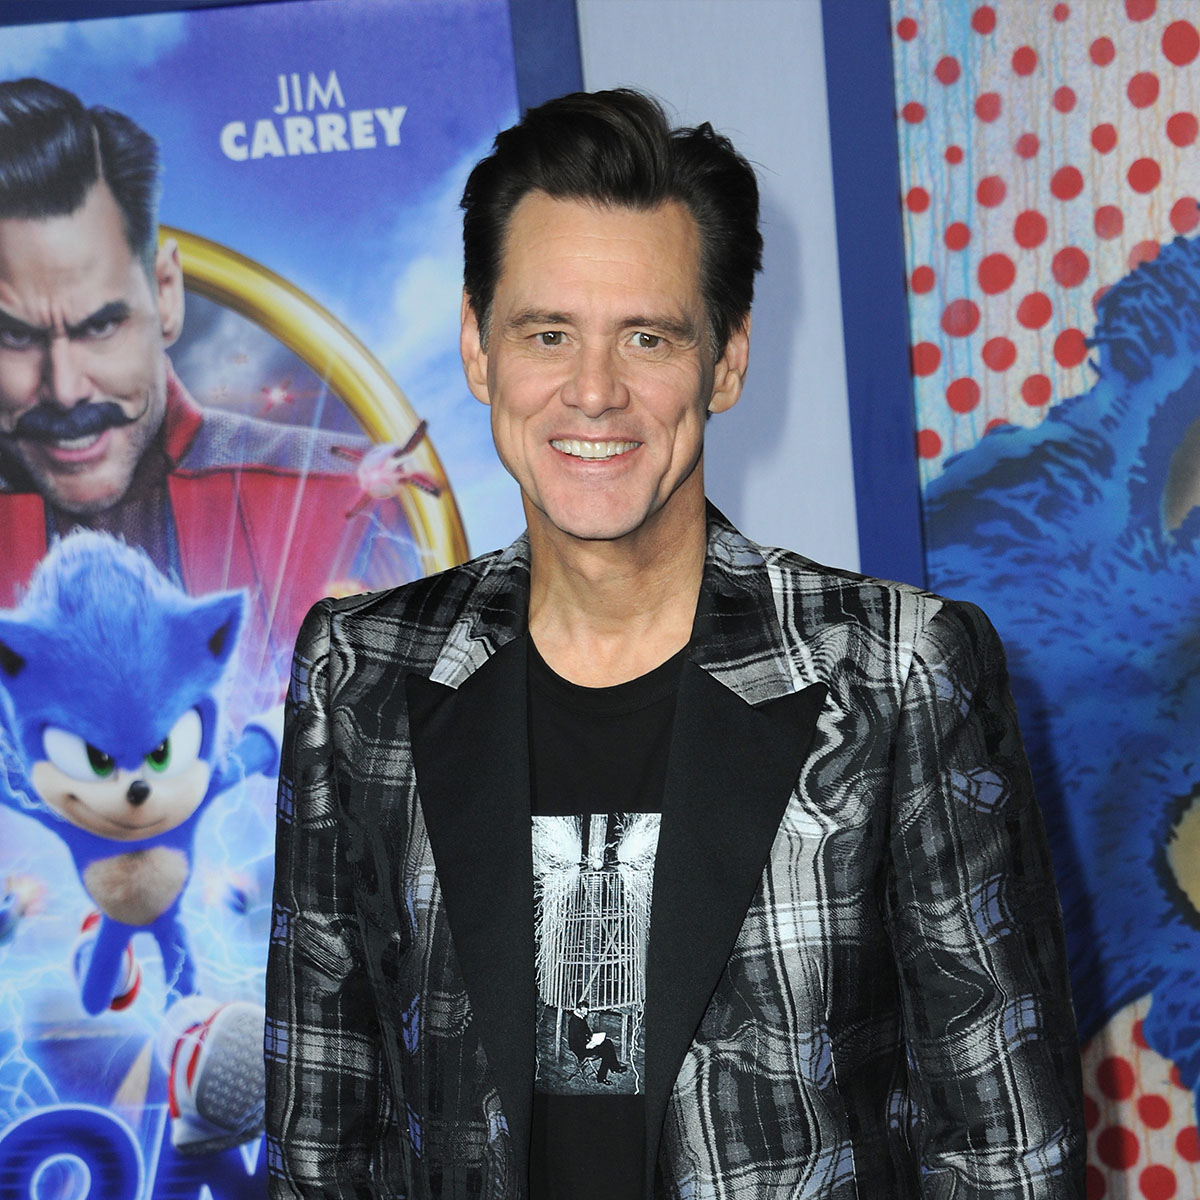 The 'Sonic the Hedgehog 2' Cast Deliver Their Best Jim Carrey